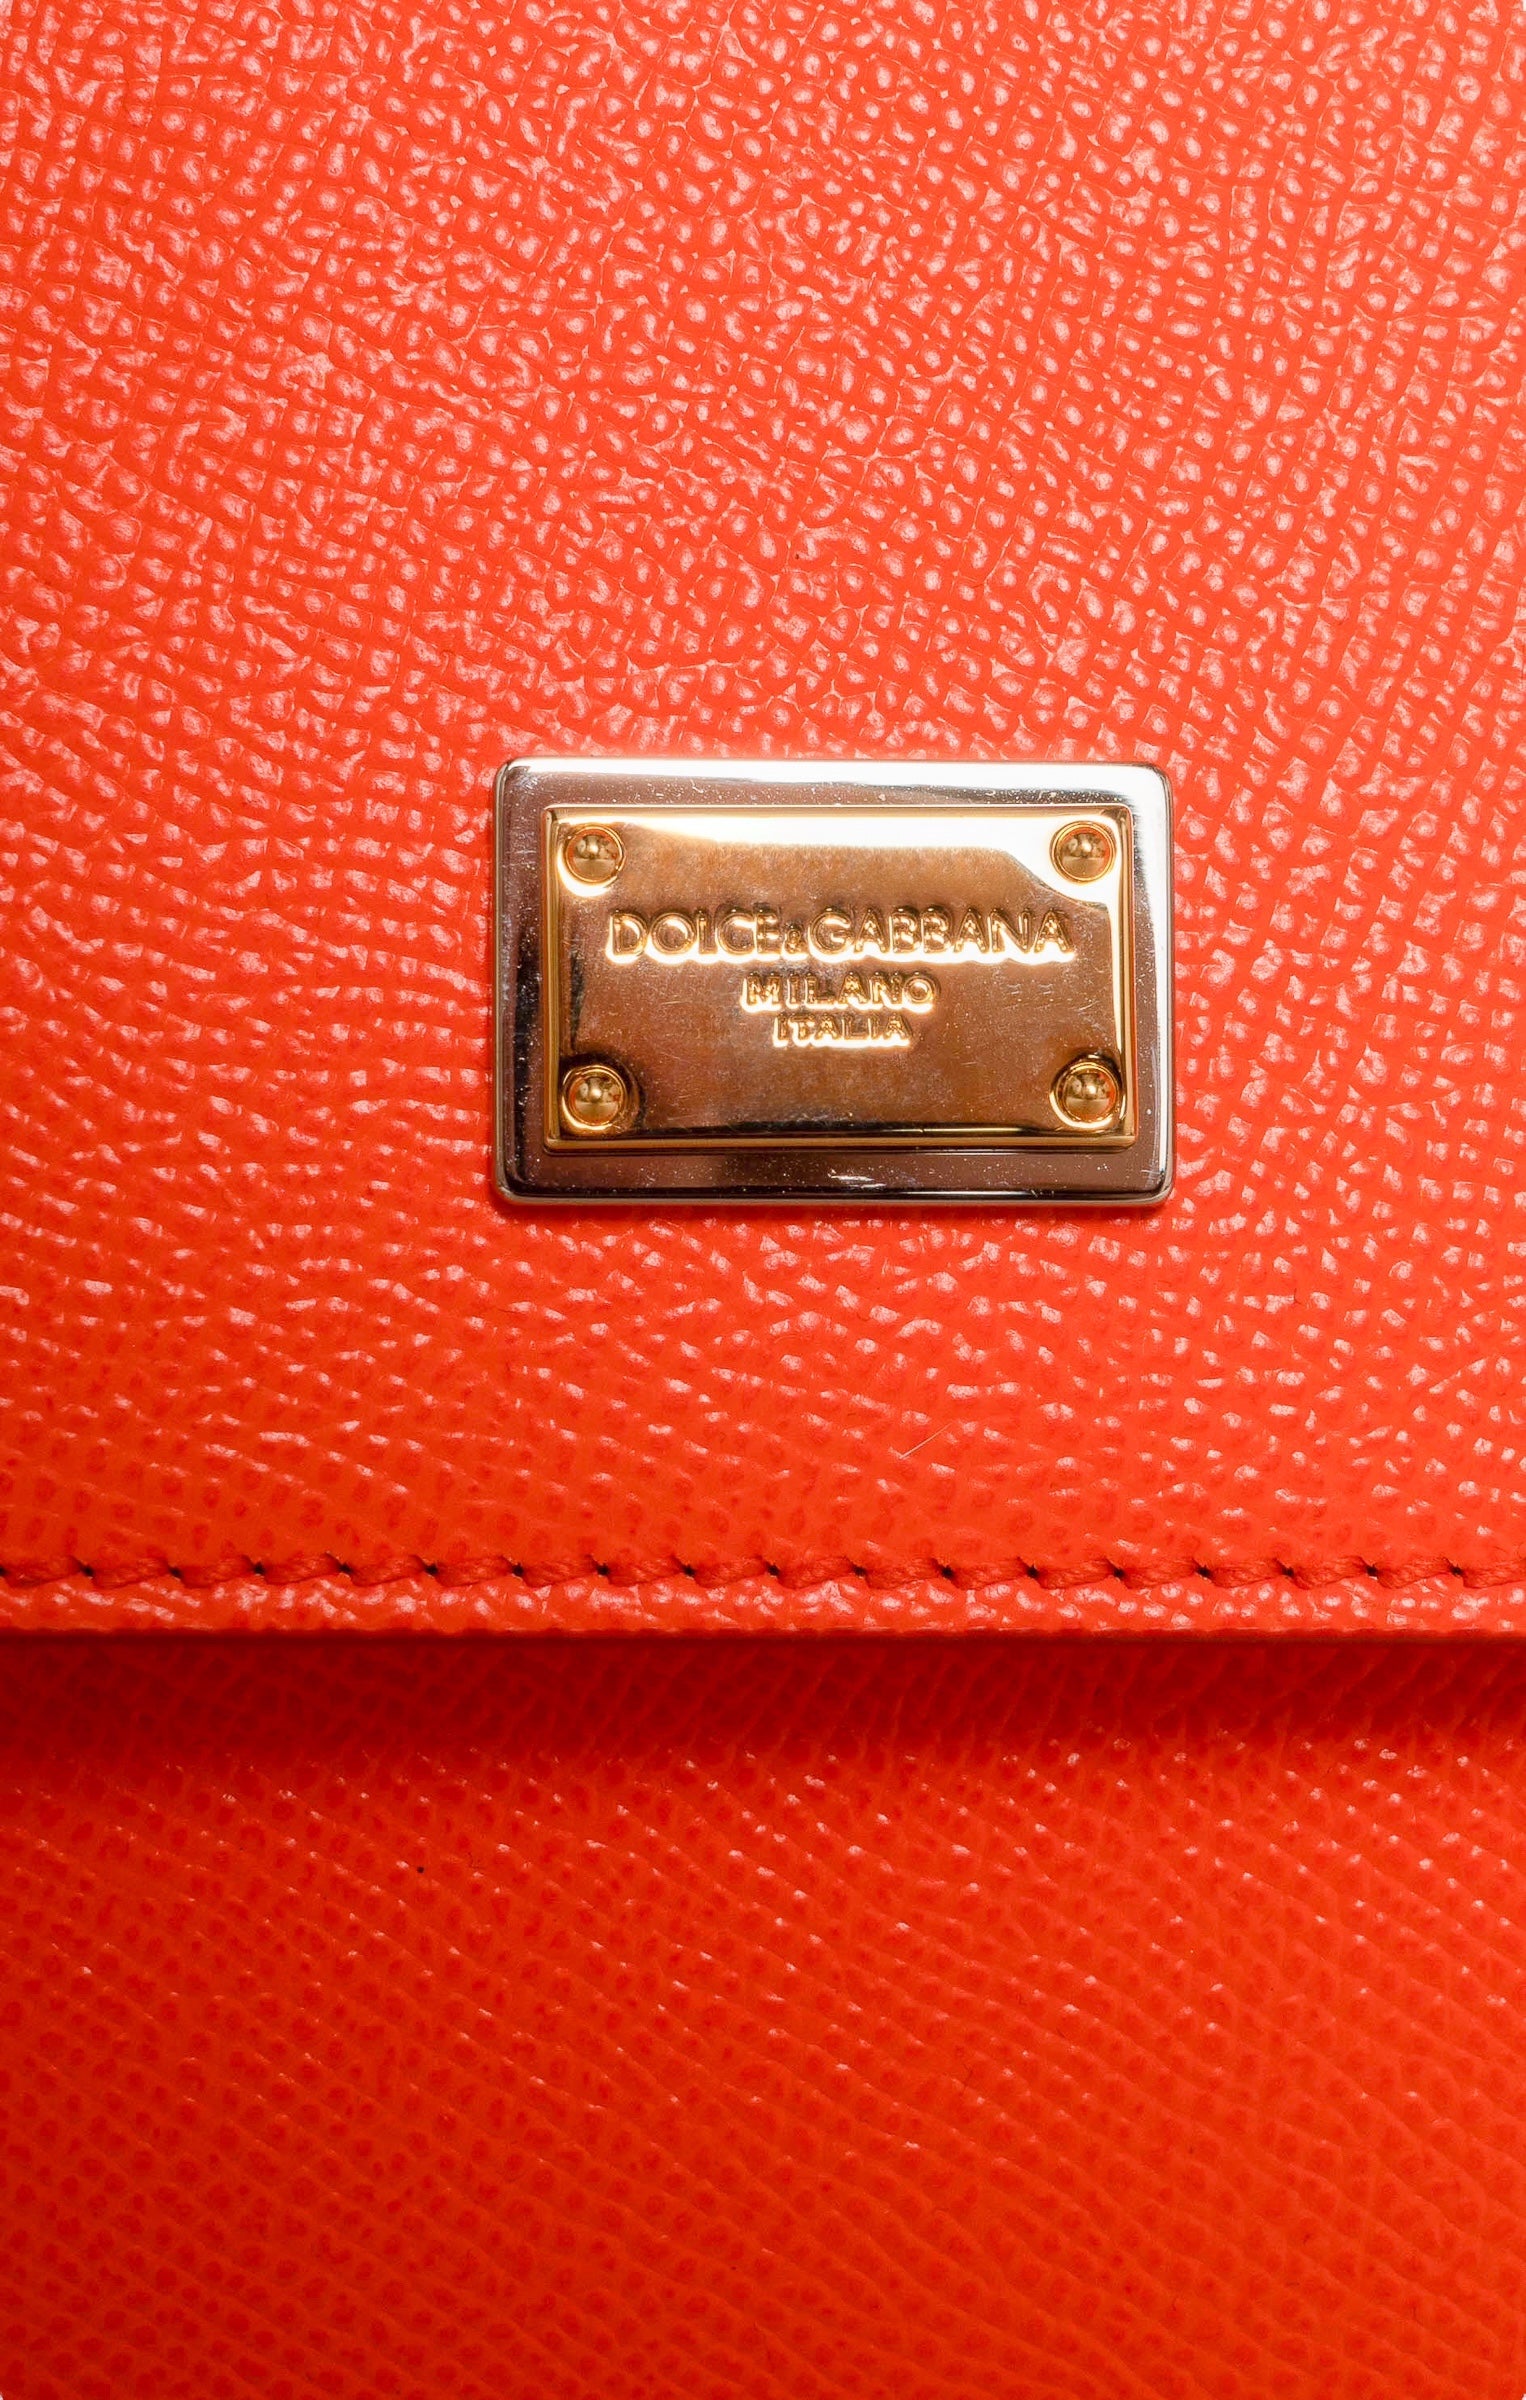 DOLCE & GABBANA (RARE & NEW) with tags Bag Size: 9.75" x 4.75" x 7.75"; 3.375" drop handle